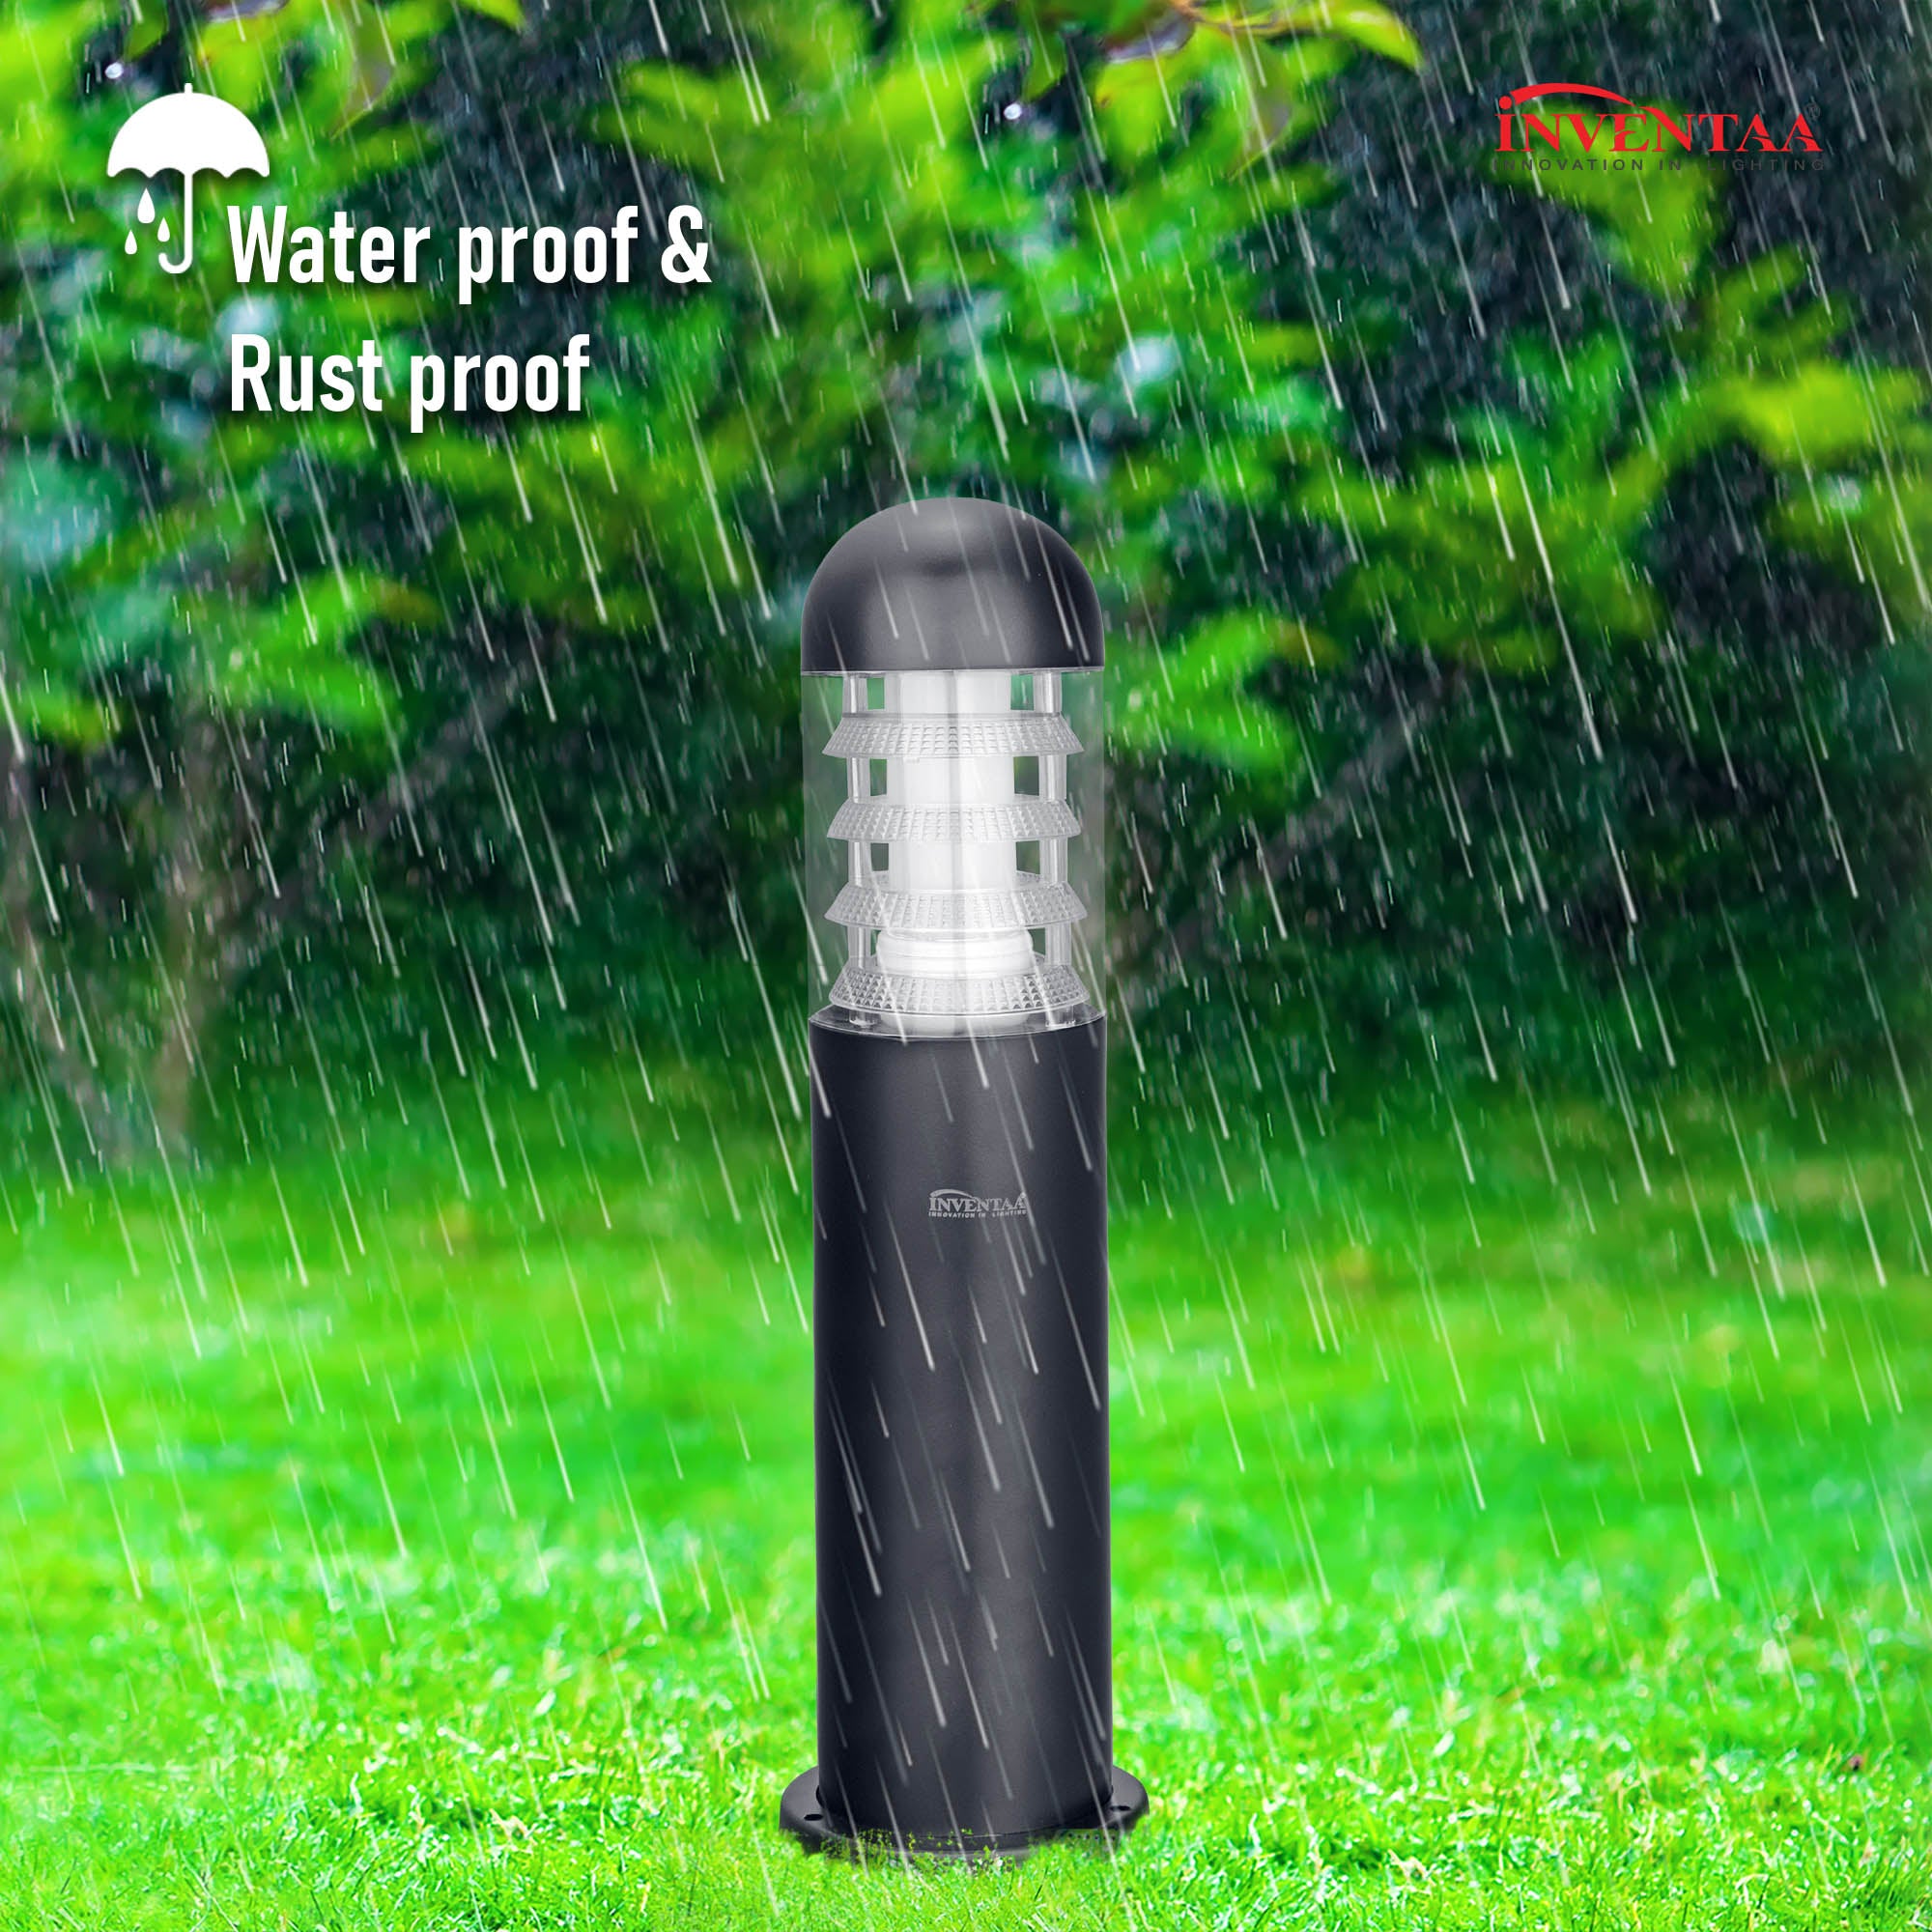 Electra 1 feet led garden bollard light featuring its waterproof resistant for outdoor use #size_1 feet